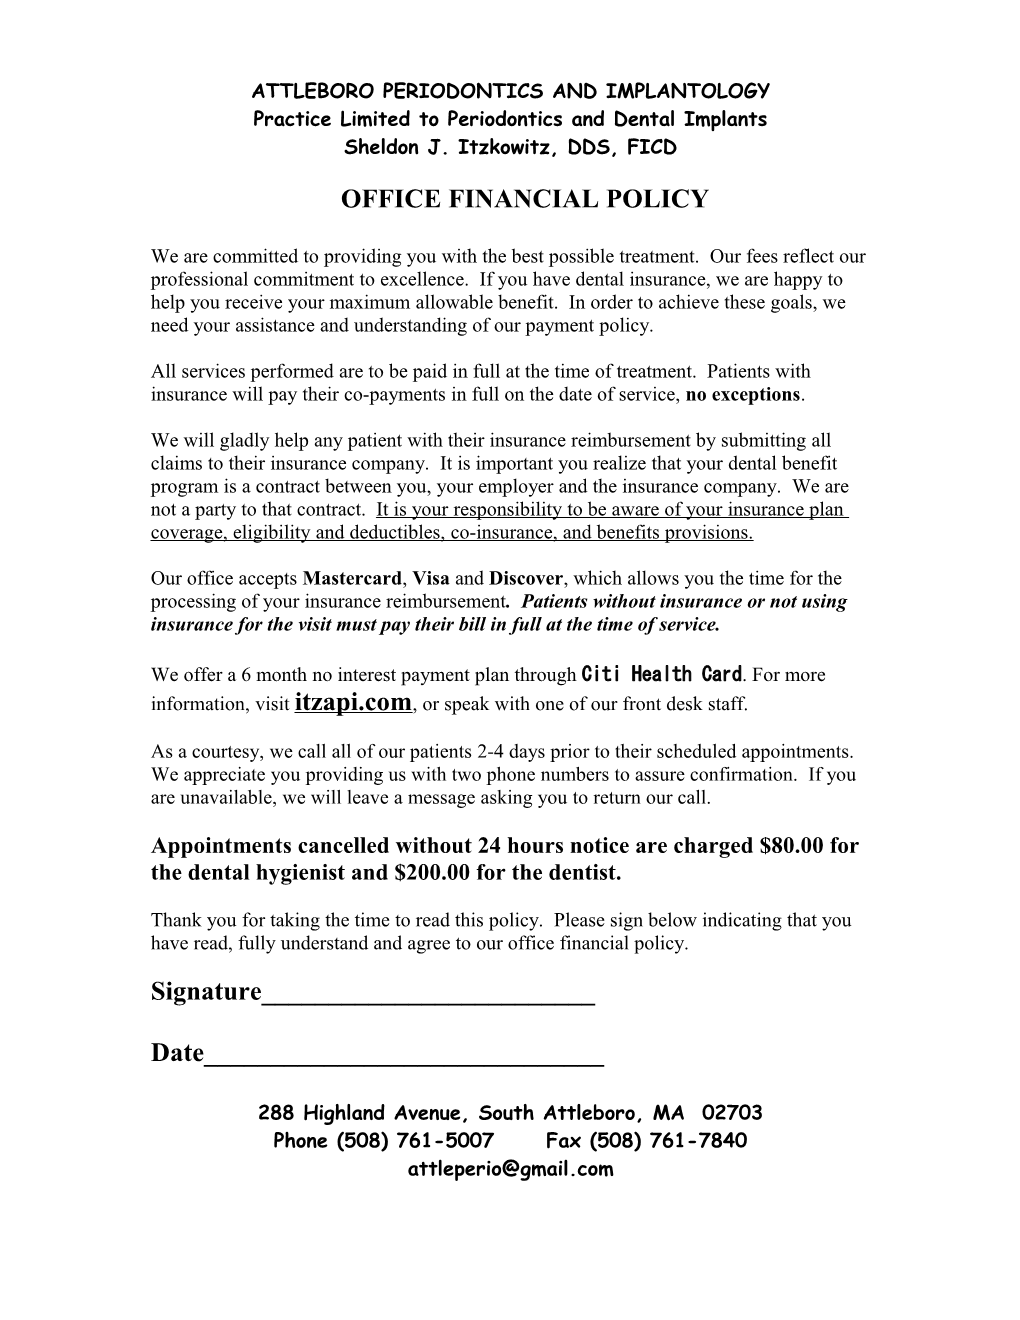 Office Financial Policy